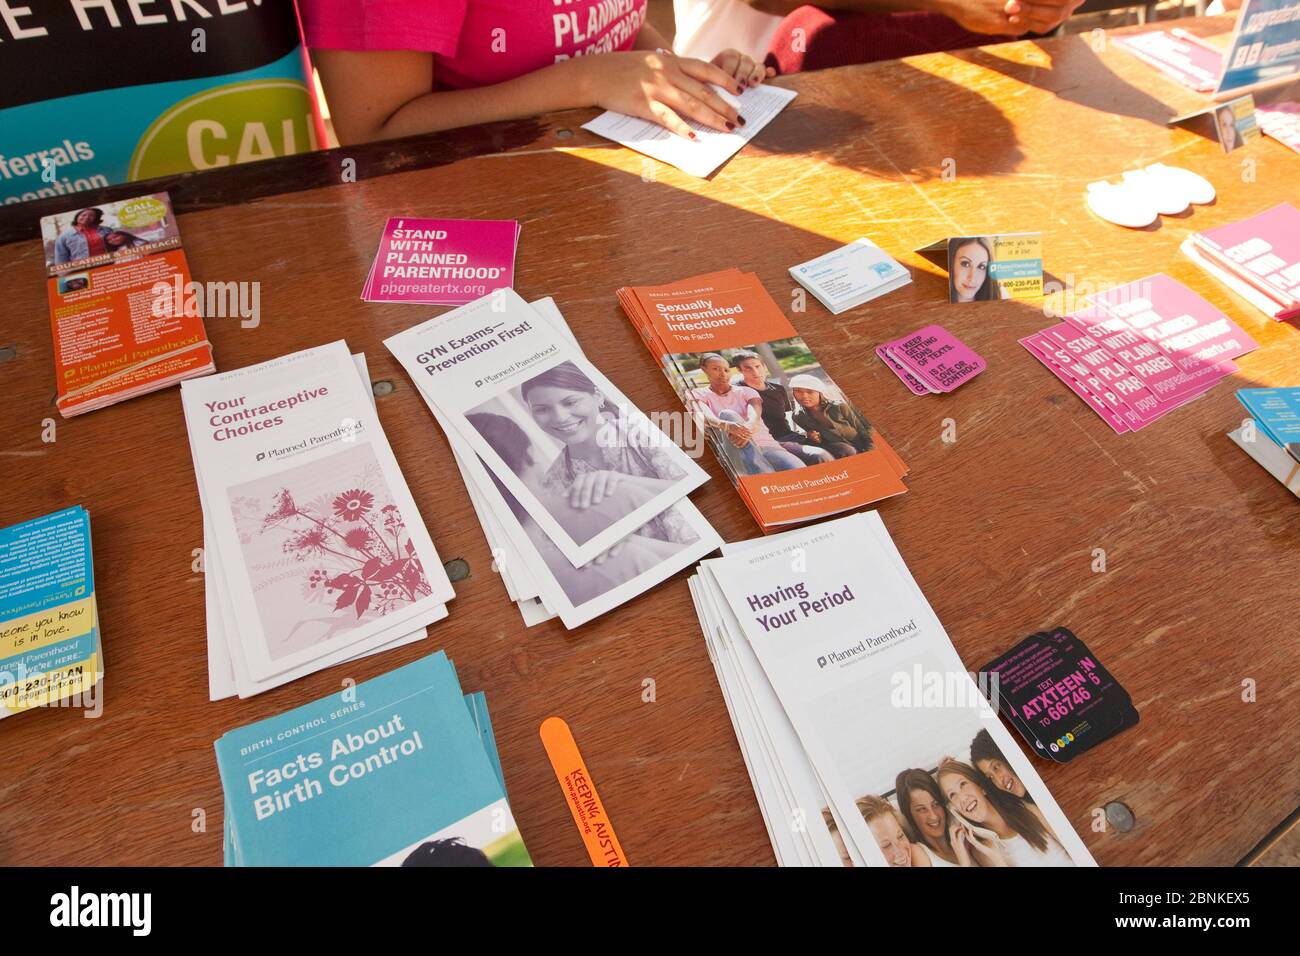 Austin Texas USA, January 21, 2013: Brochures promote various women's health services provided by Planned Parenthood on an information table at an outdoor festival at a small college. Stock Photo